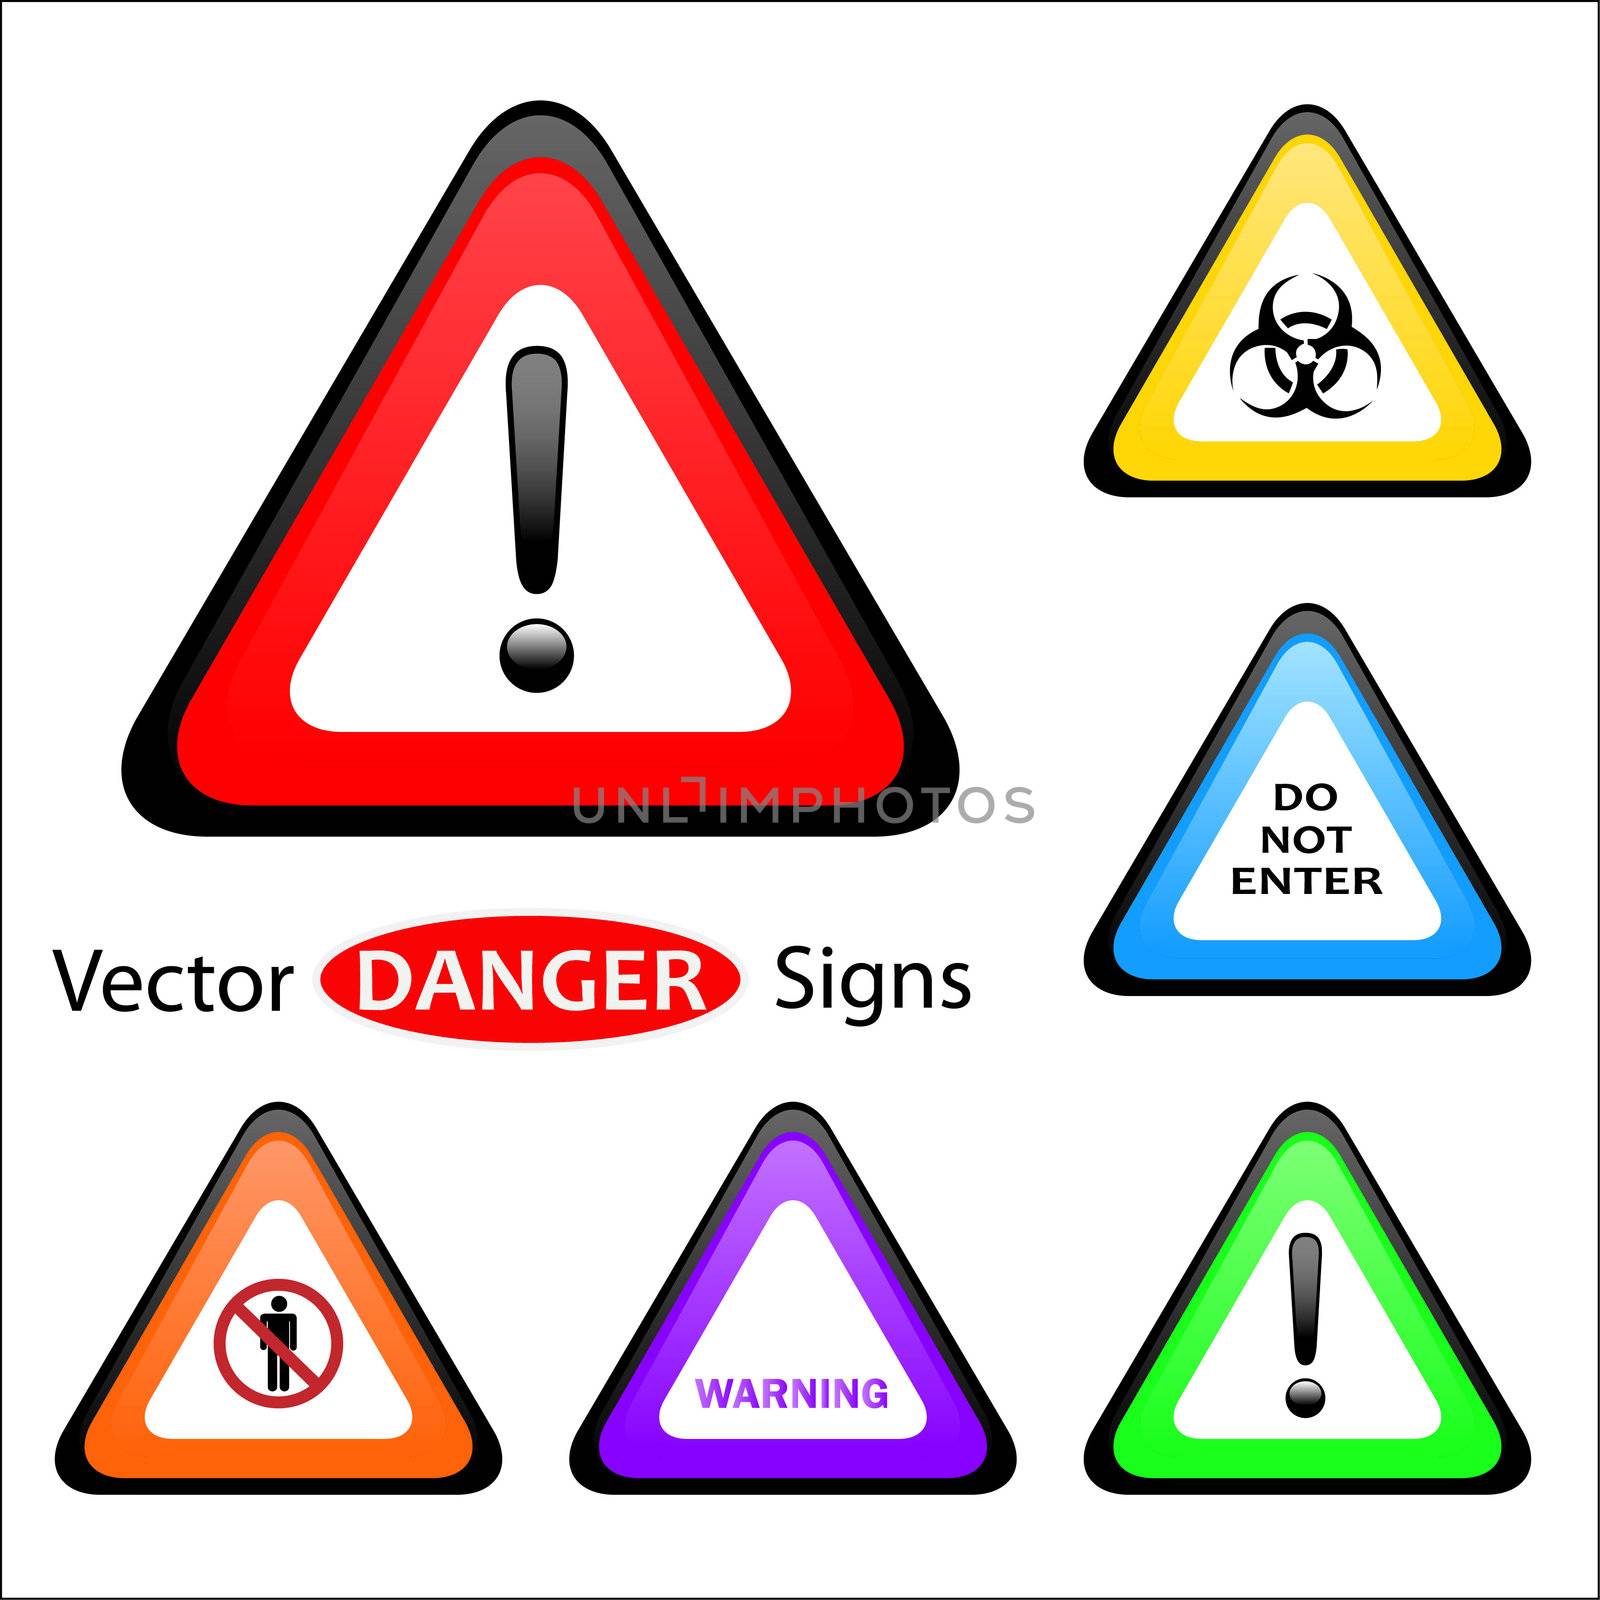 Image of various warning signs isolated on a white background.